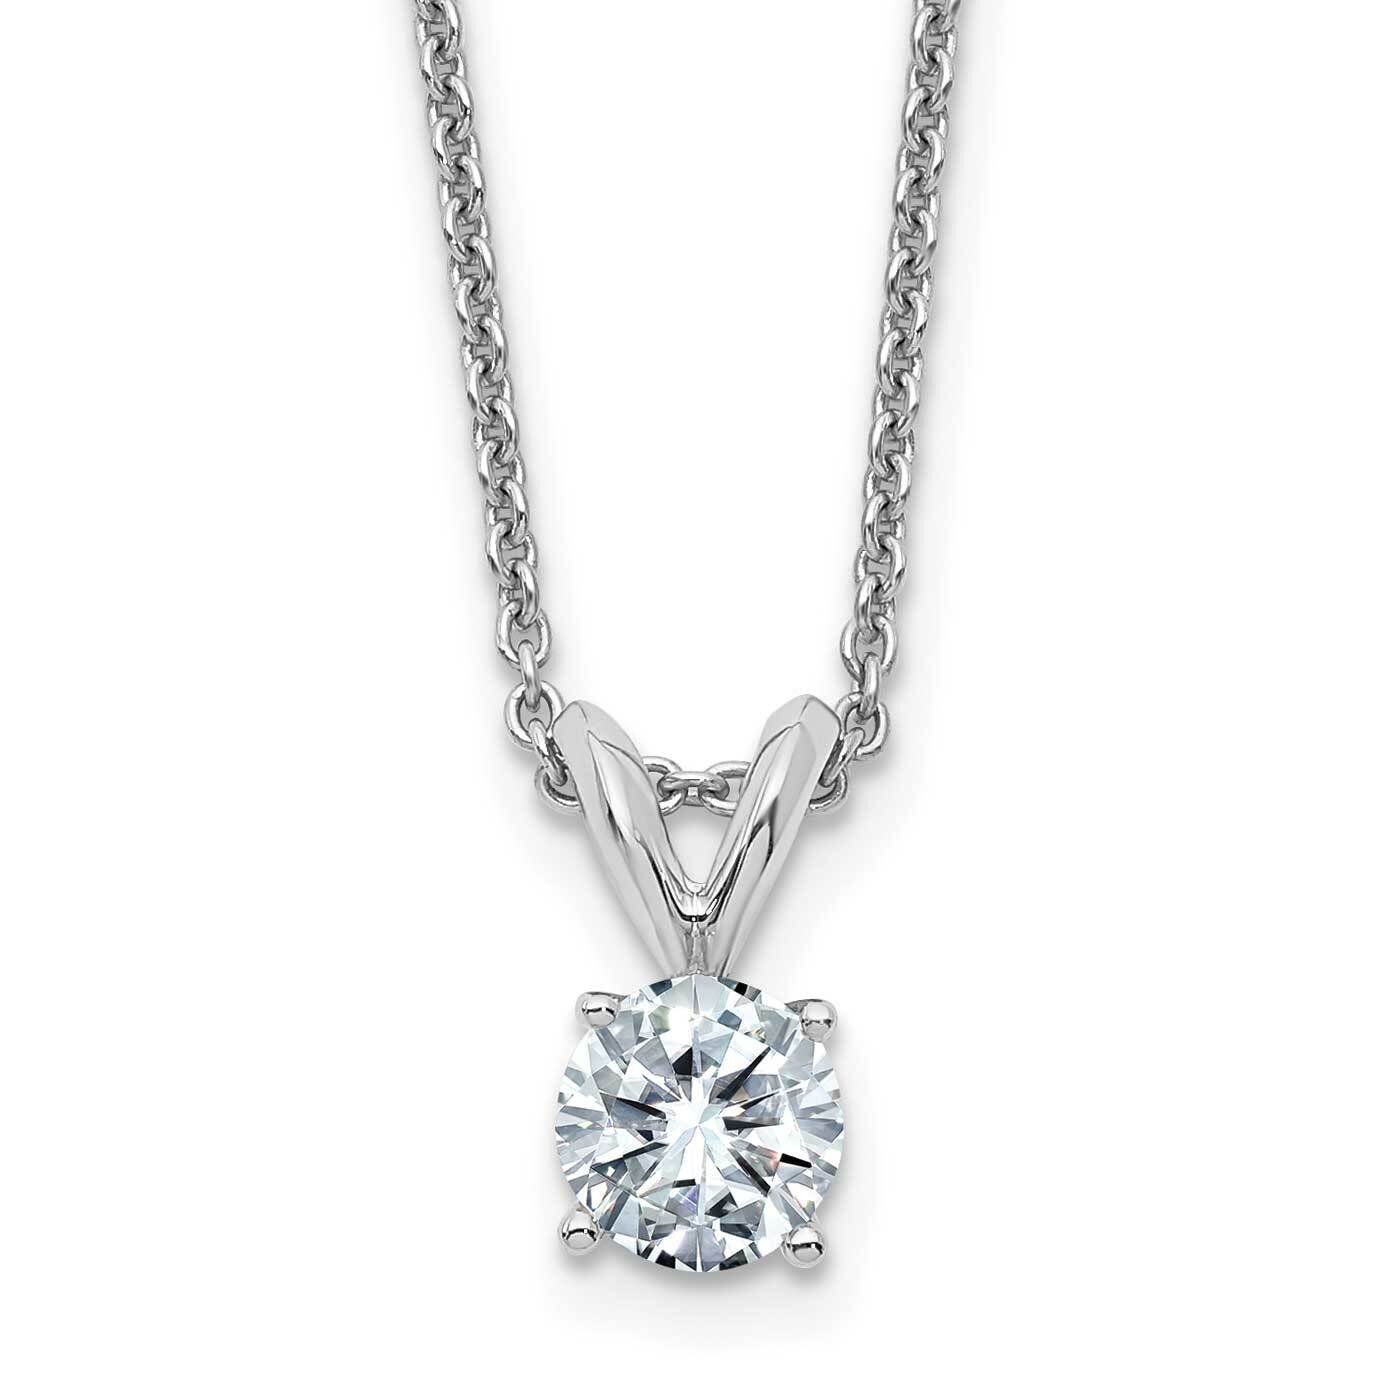 1/2ct. 5.0mm Round D E F Pure Light Moissanite Solitaire Necklace 14k White Gold WG936-5MP